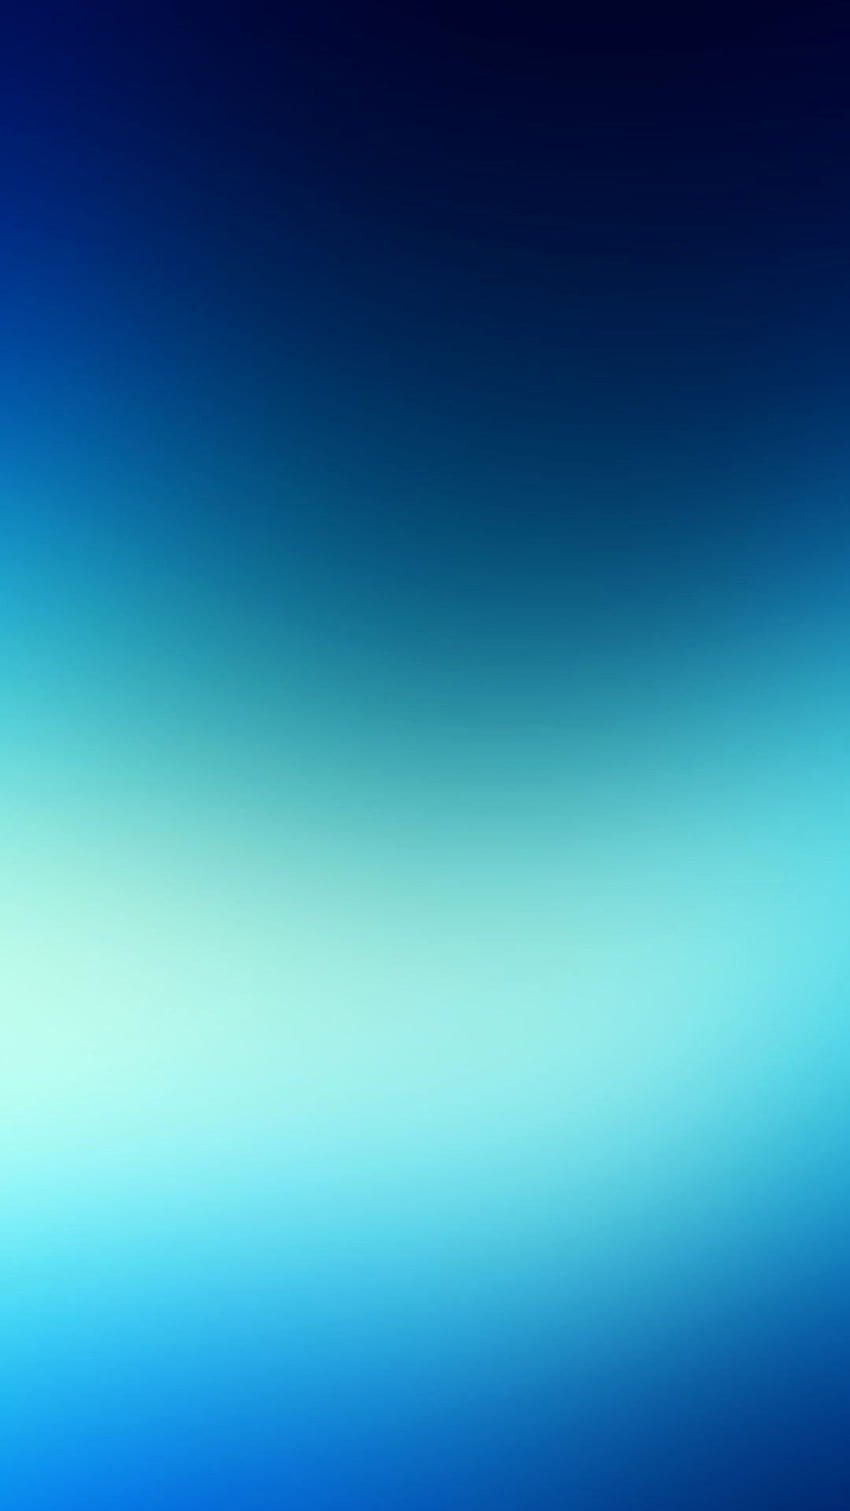 Blue iPhone Backgrounds Awesome Blue Blur iPhone 6 Plus HD phone wallpaper